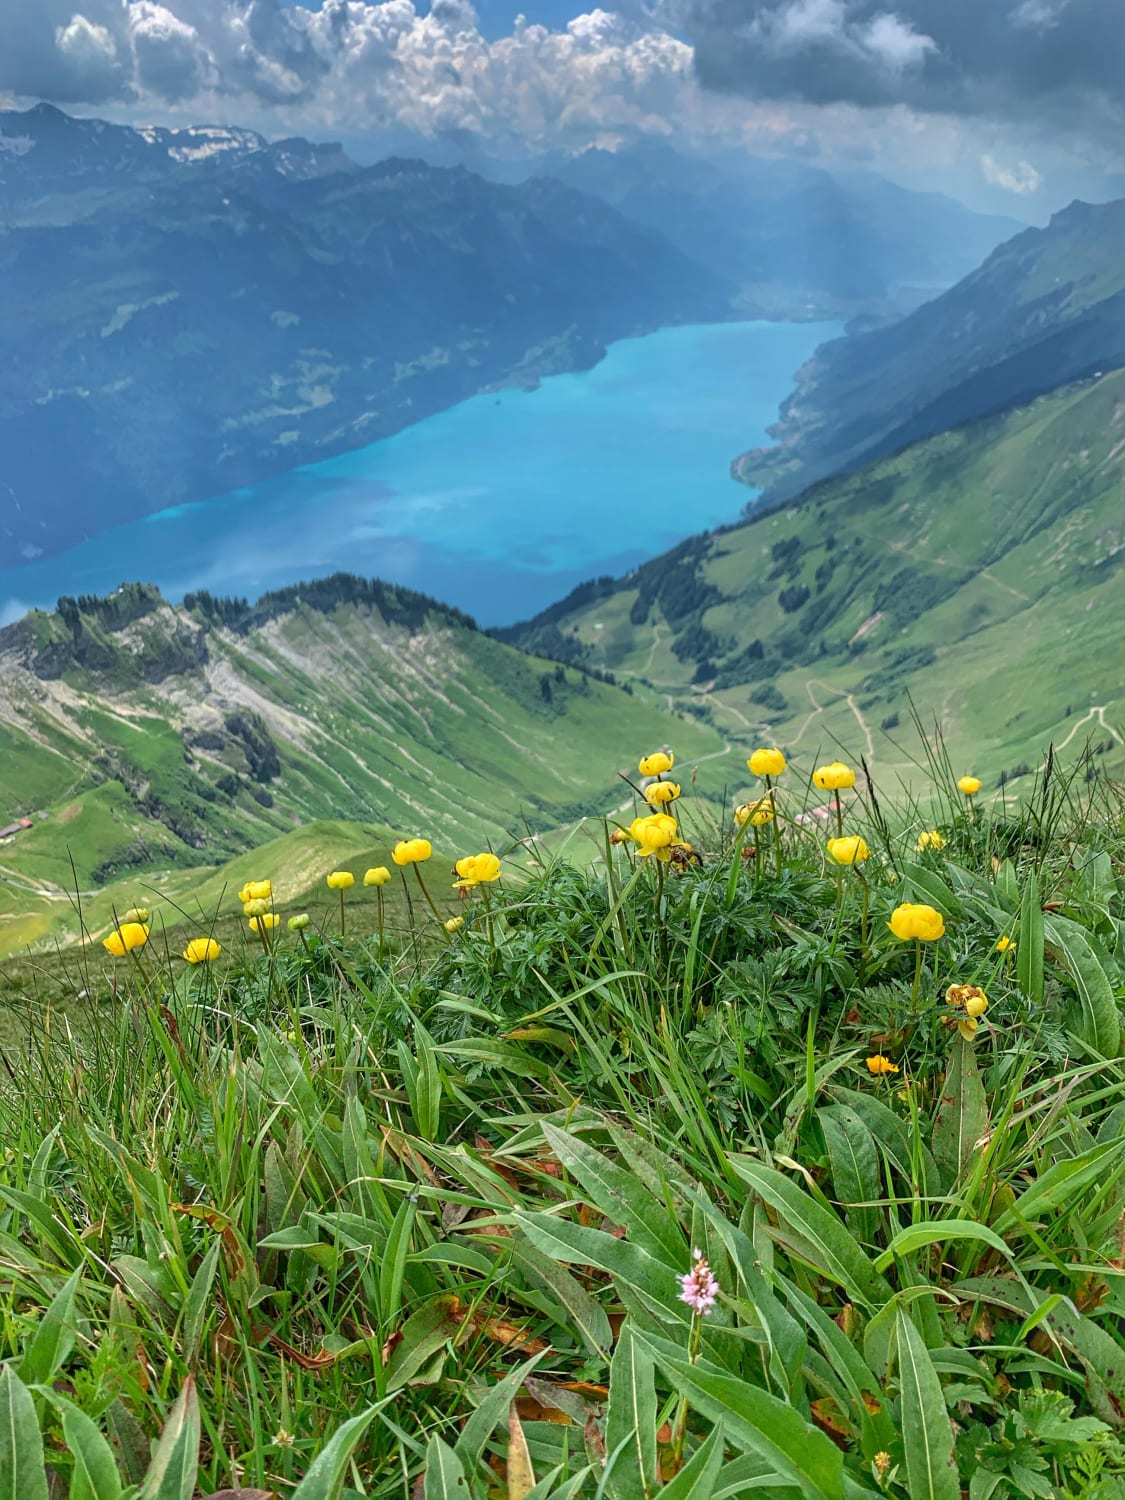 Hiking in the Swiss Alps above Lake Brienz